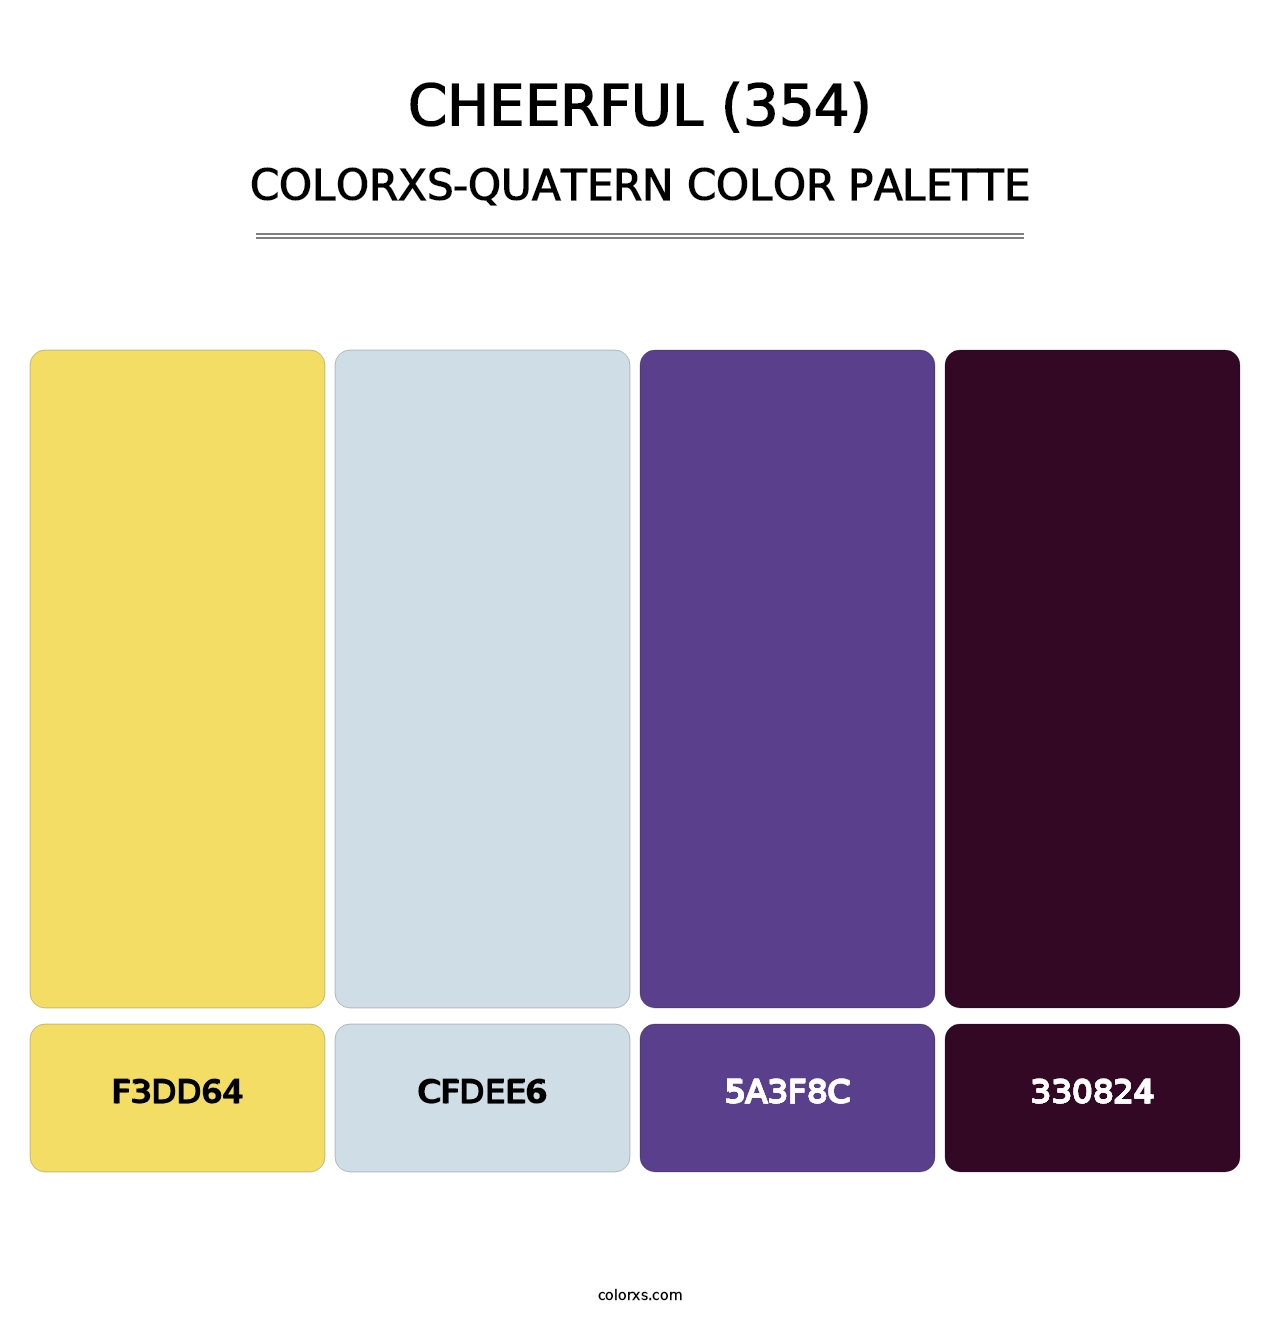 Cheerful (354) - Colorxs Quatern Palette